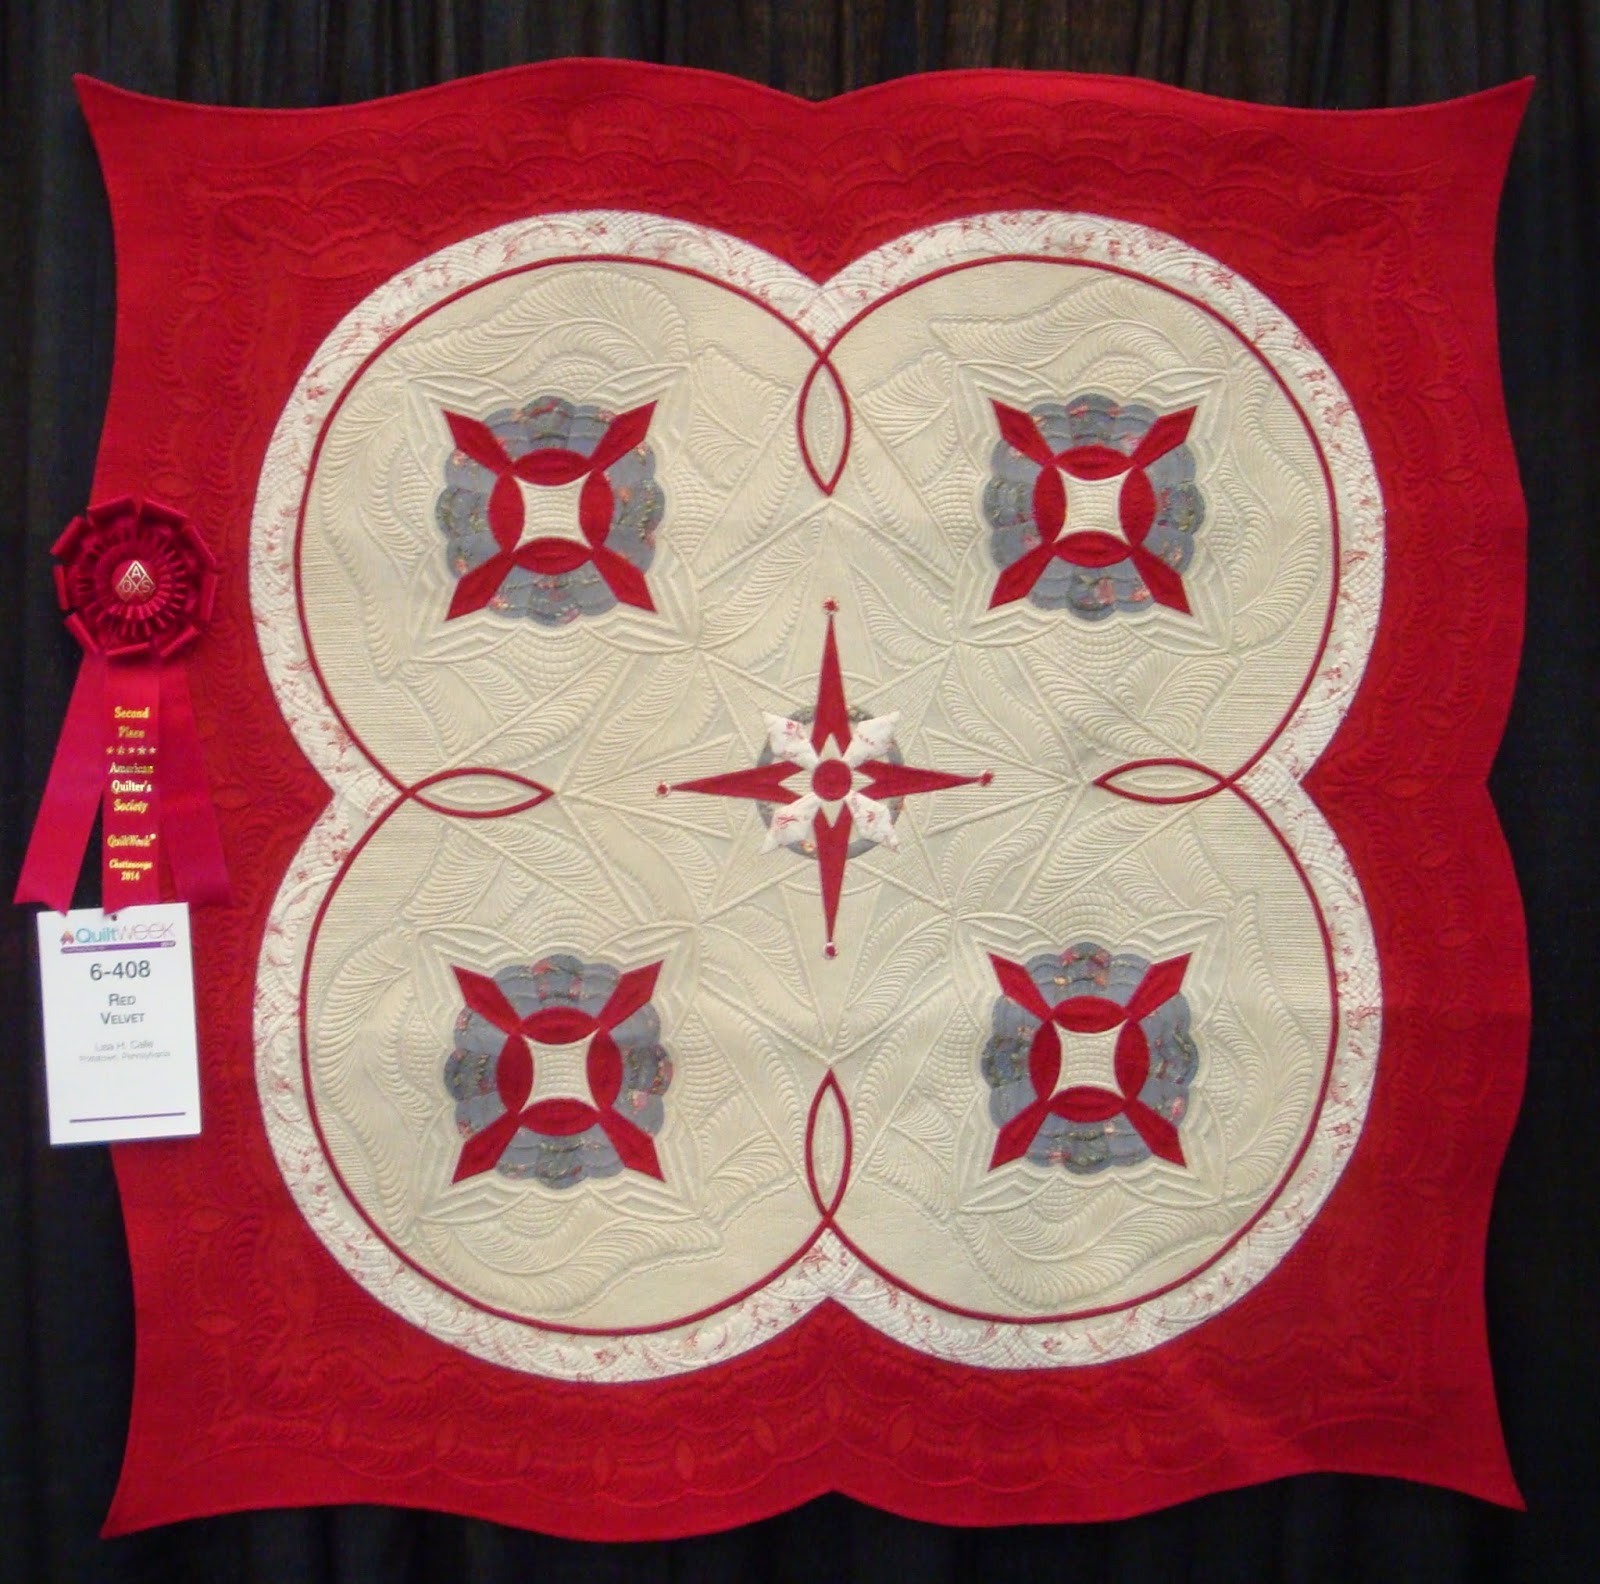 FABRIC THERAPY: 2014 AQS Chattanooga Quilt Show, Part Five